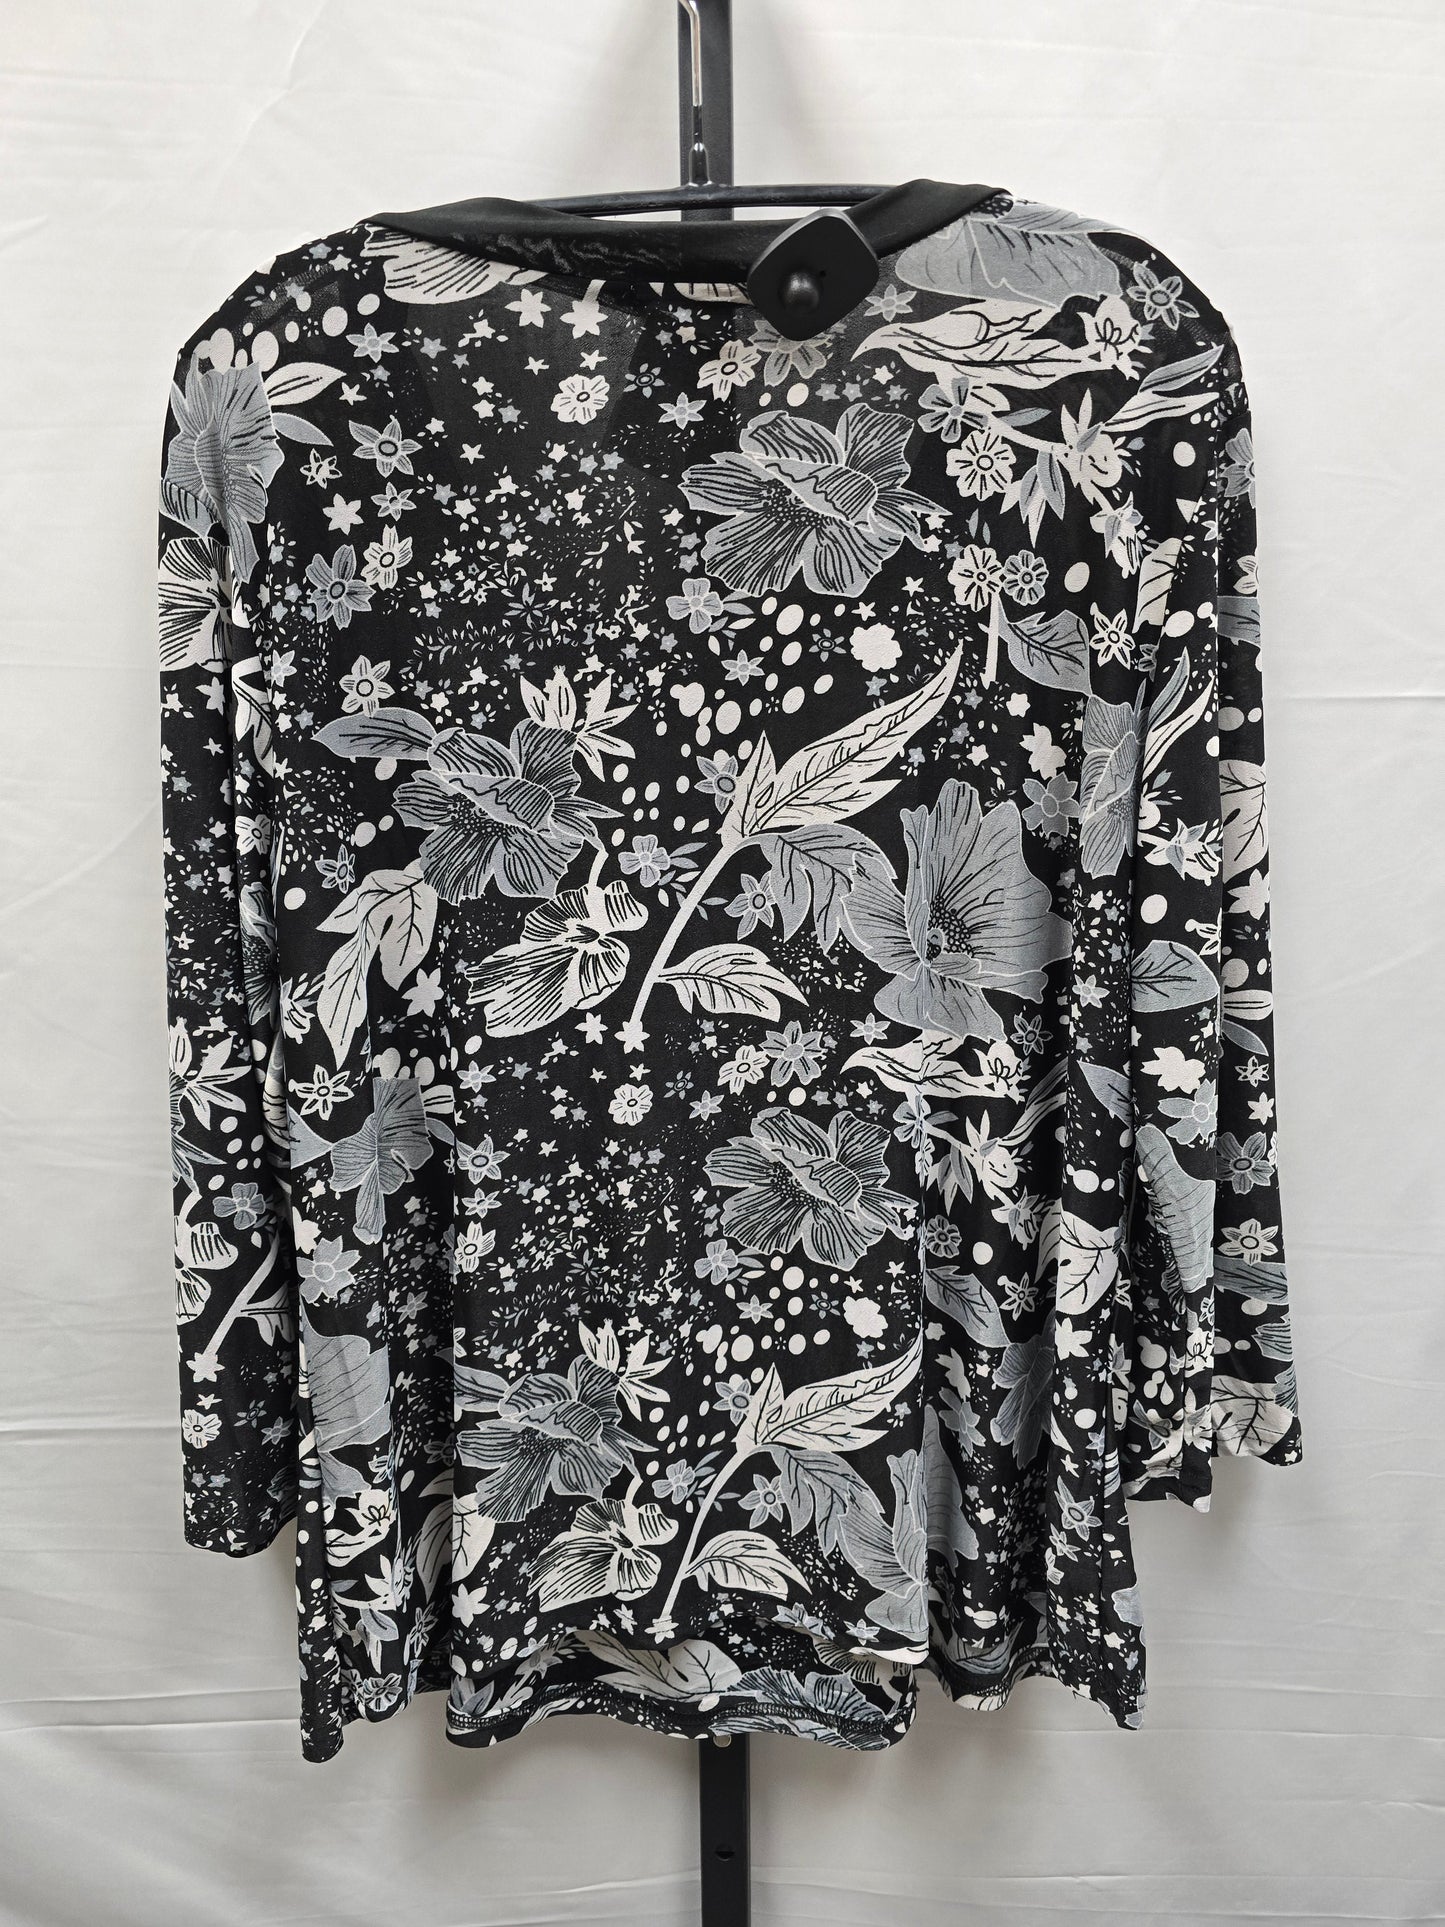 Floral Print Top Long Sleeve Everyday Comfort, Size 3x